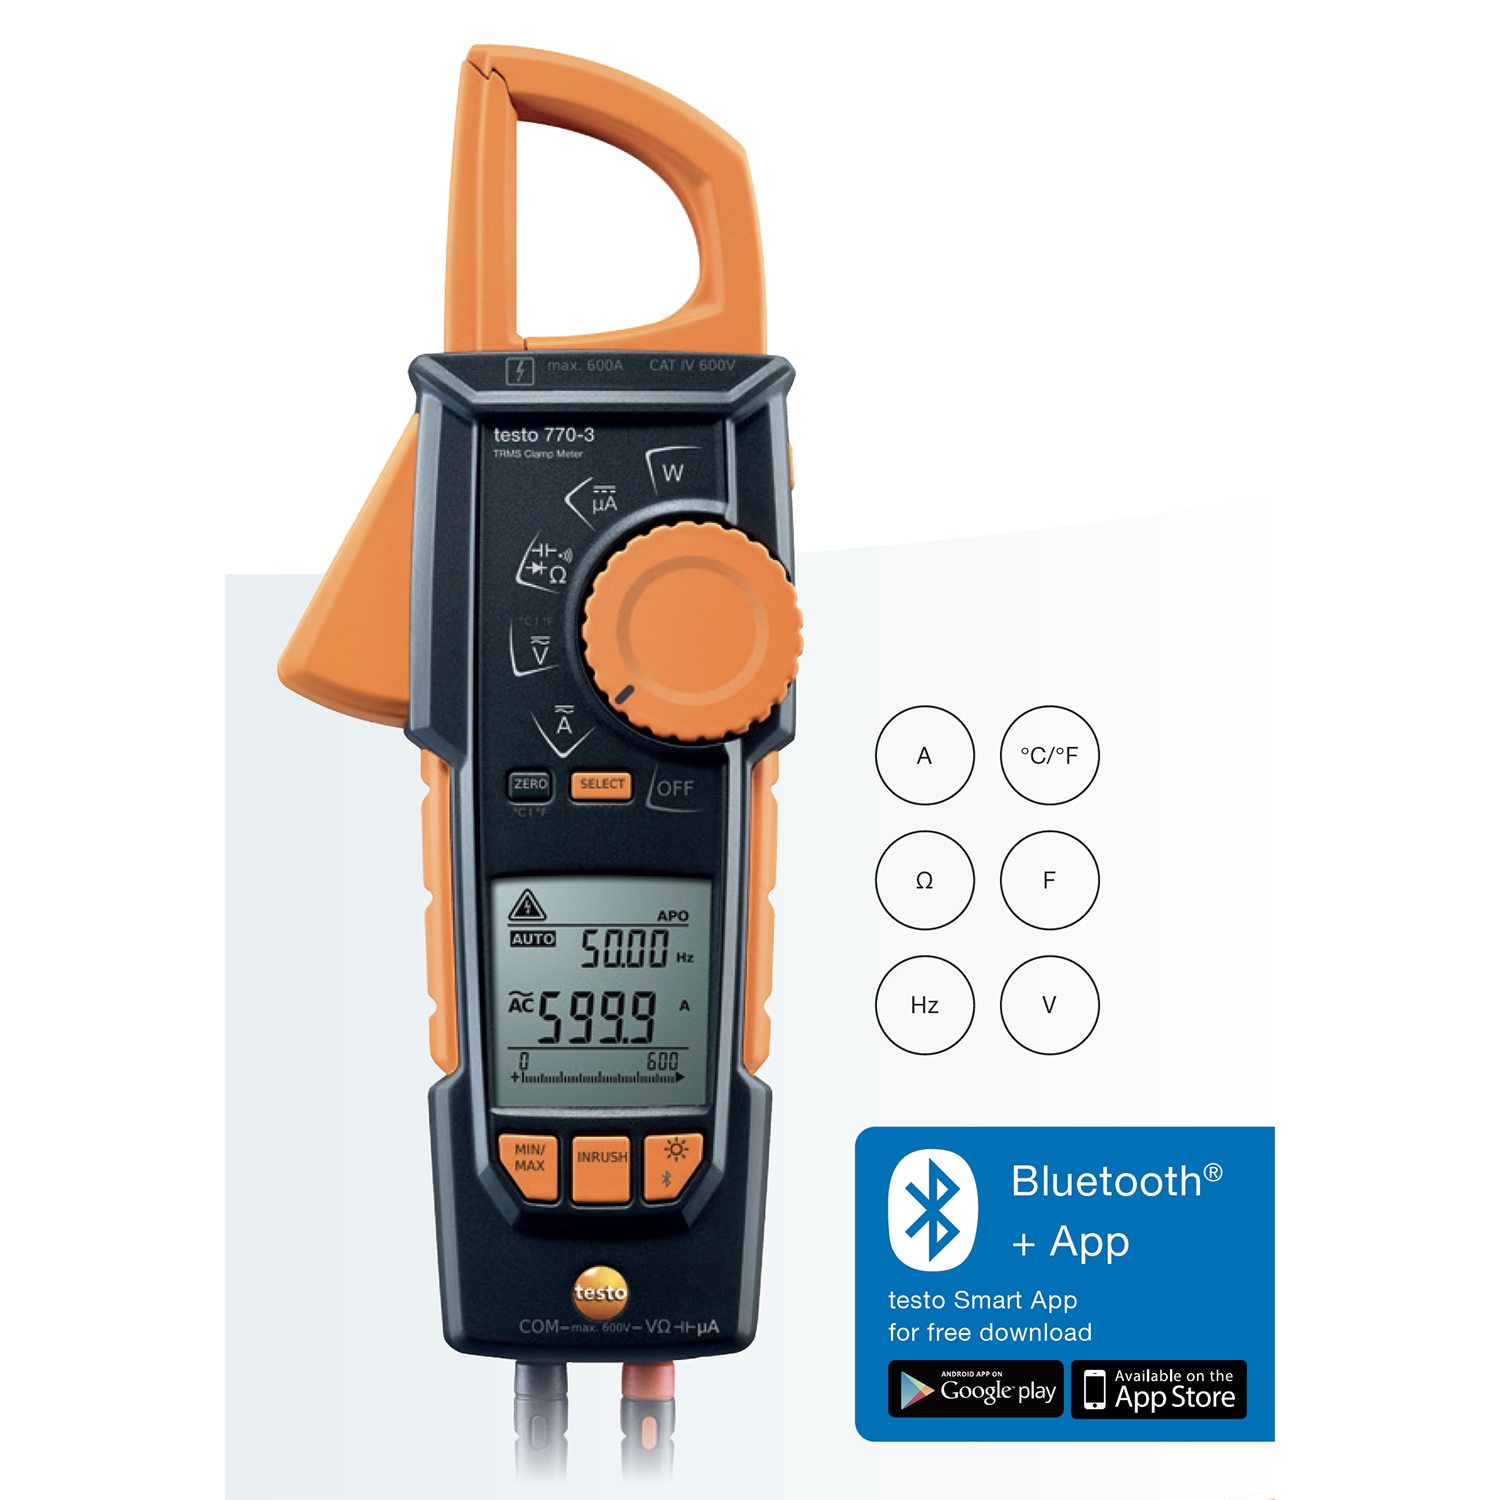 Testo 770-3 Professional Clamp Meter with Bluetooth and Testo Smart Probes